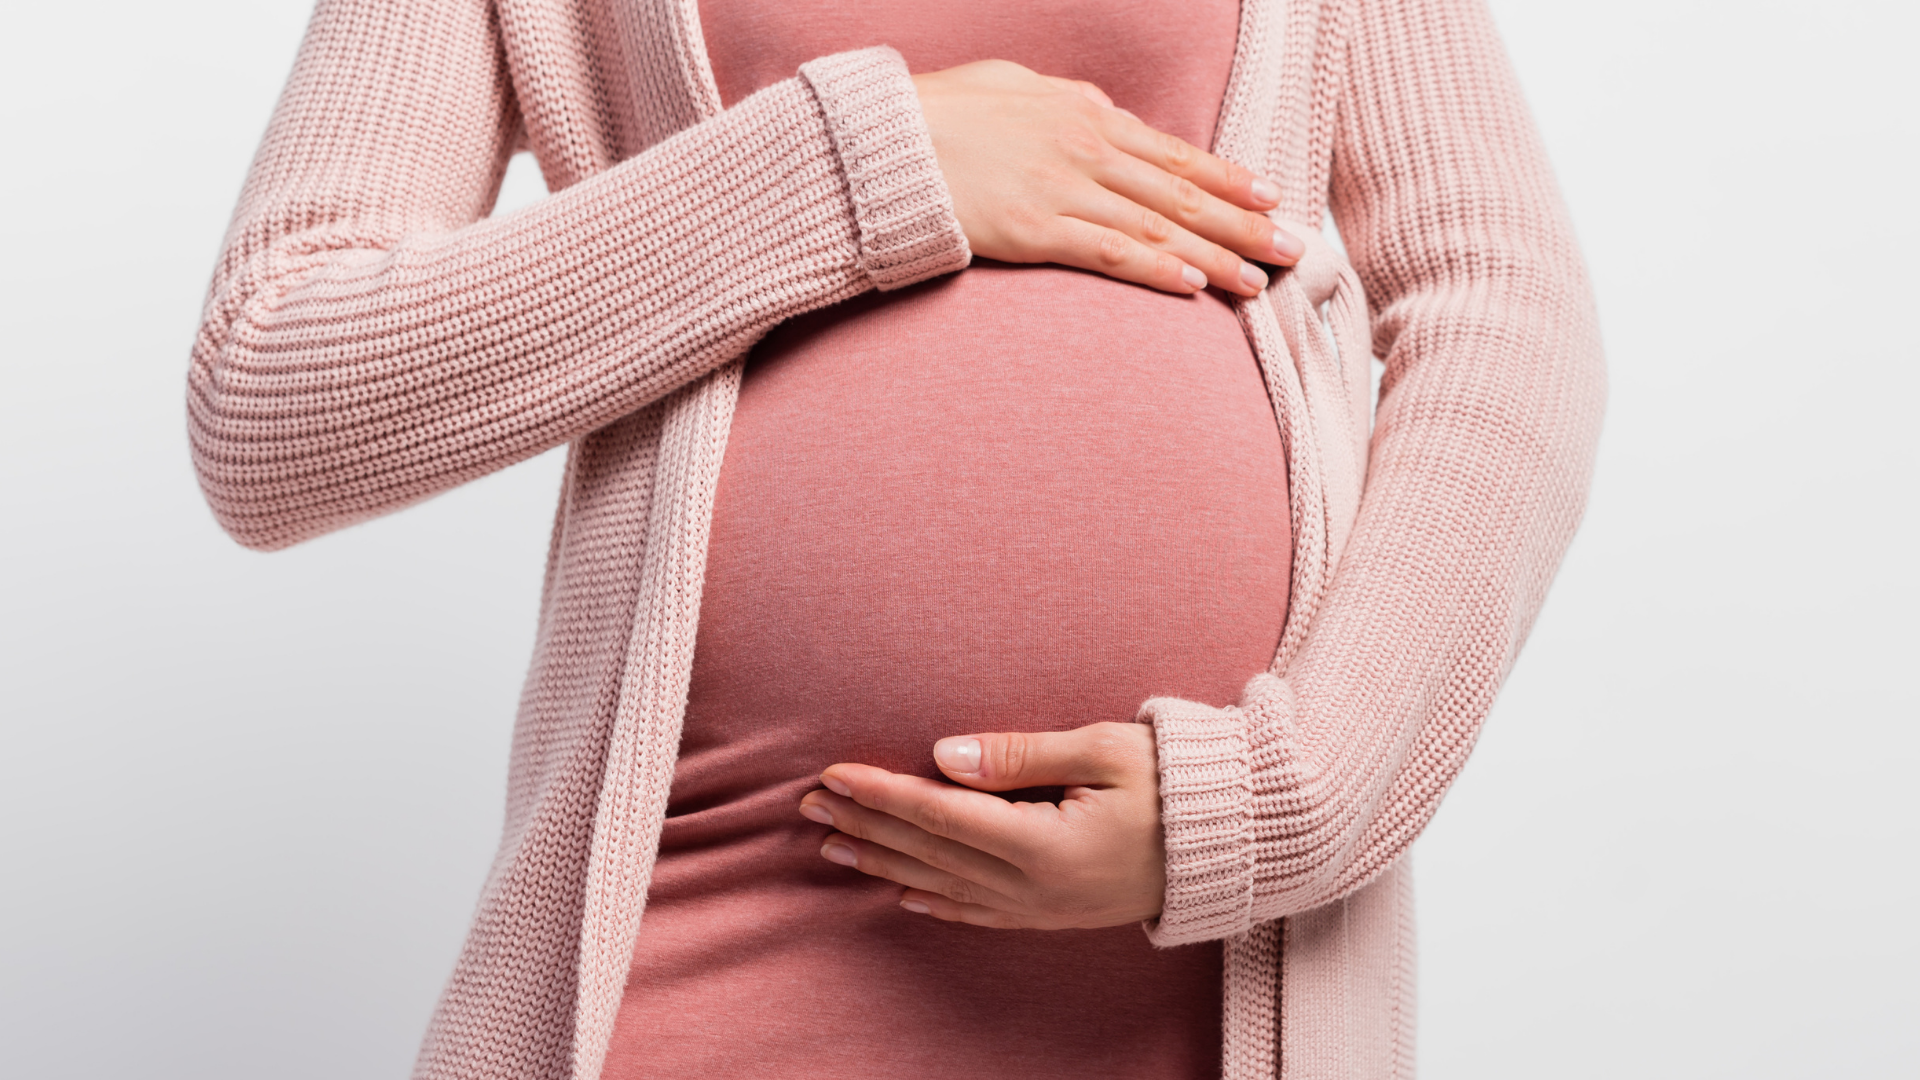 Where Does the Weight Gain Go During Your Pregnancy?